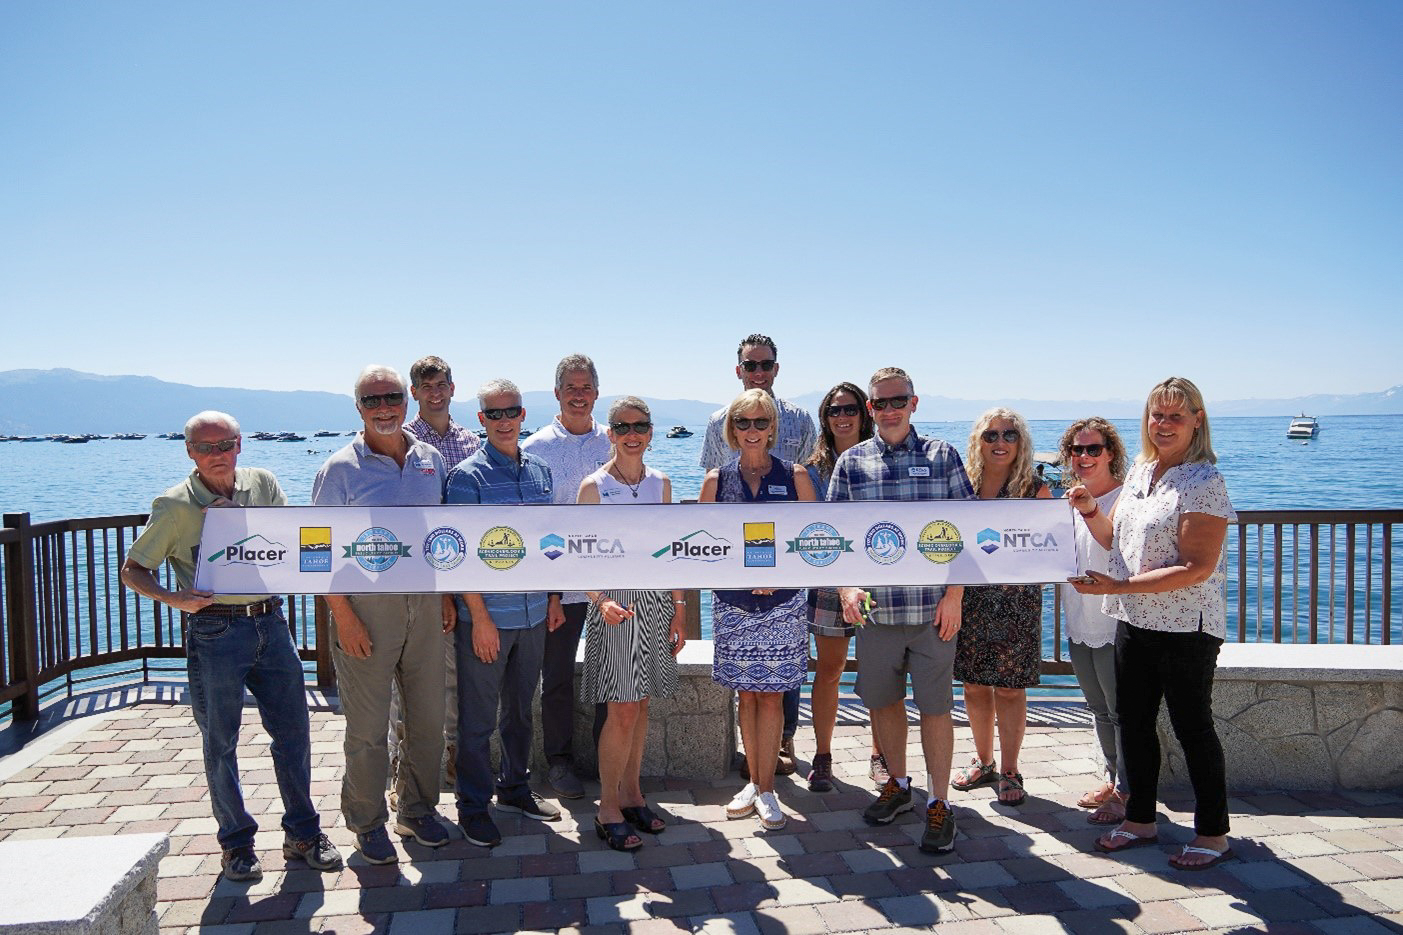 Local, state, and regional leaders gather to cut the ribbon to celebrate accessibility improvements at a Lake Tahoe waterfront recreation area.